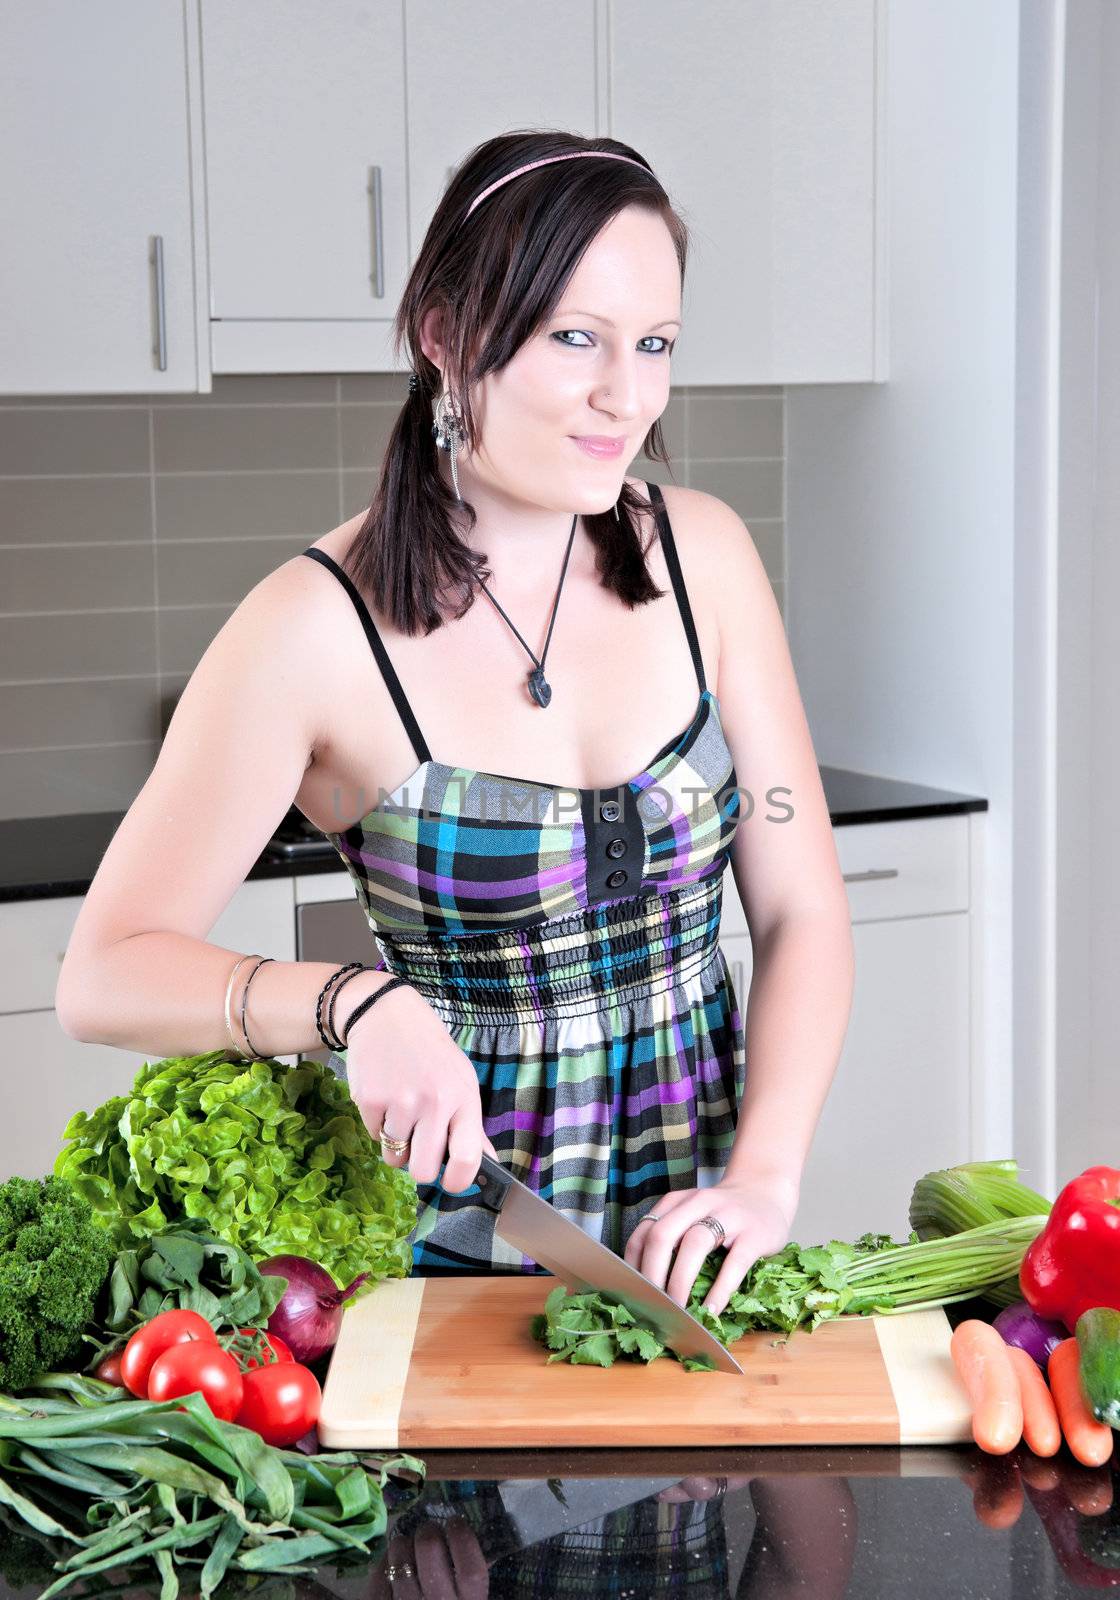 pretty young woman chopping and preparing vegetables